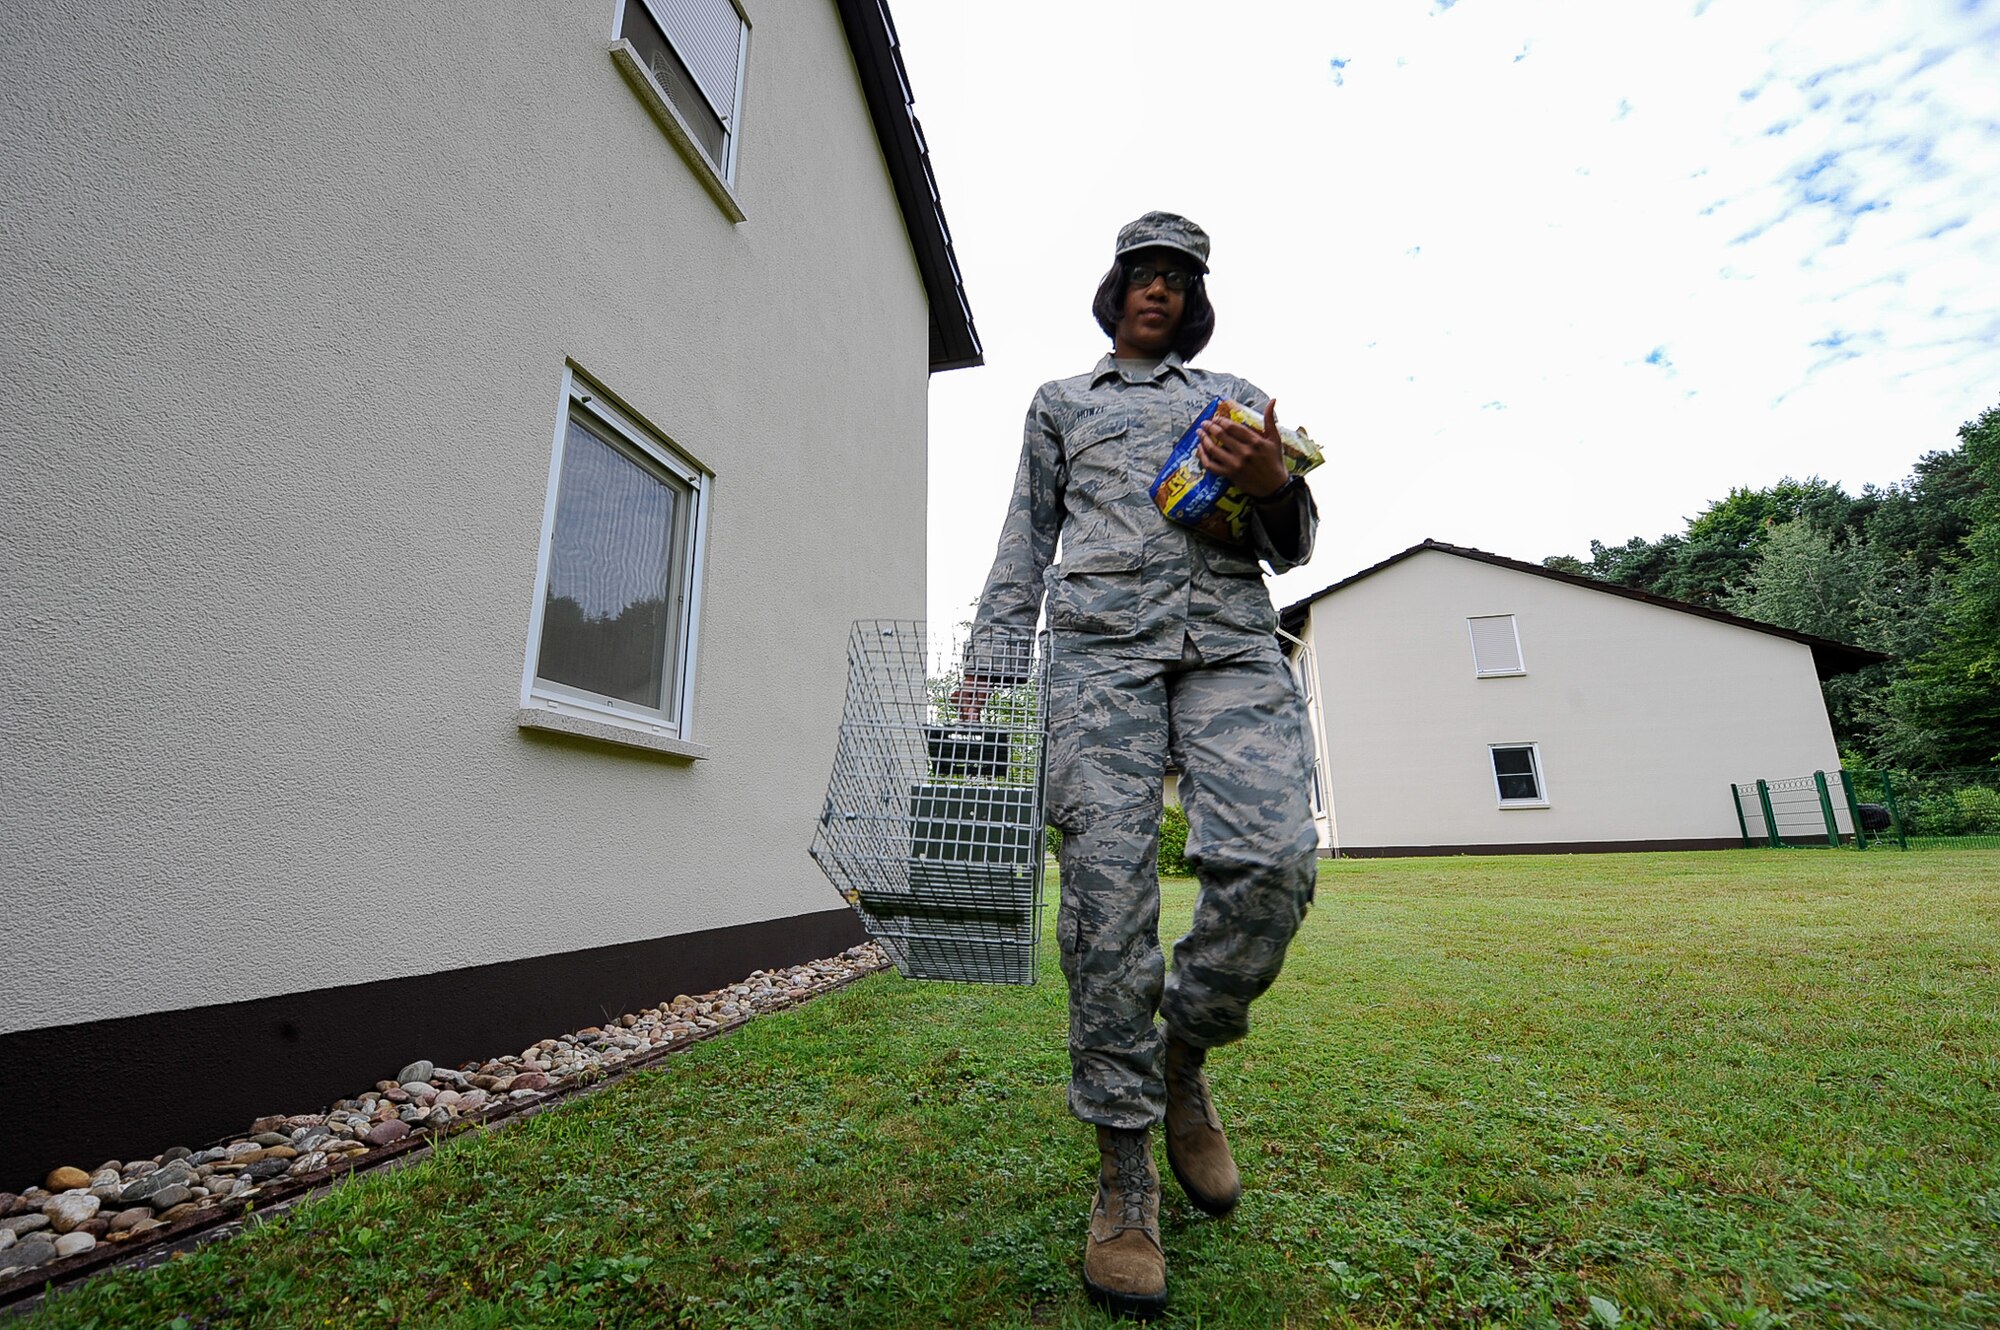 Airman 1st Class Arielle Howze, 786th Civil Engineer Squadron pest management journeyman, brings an animal trap to Vogelweh Housing on Vogelweh Military Complex, Germany, July 28, 2017.  Stray cats are common in housing and dorms areas, and pest management technicians use baited traps to capture them. (U.S. Air Force Airman 1st Class Savannah L. Waters)